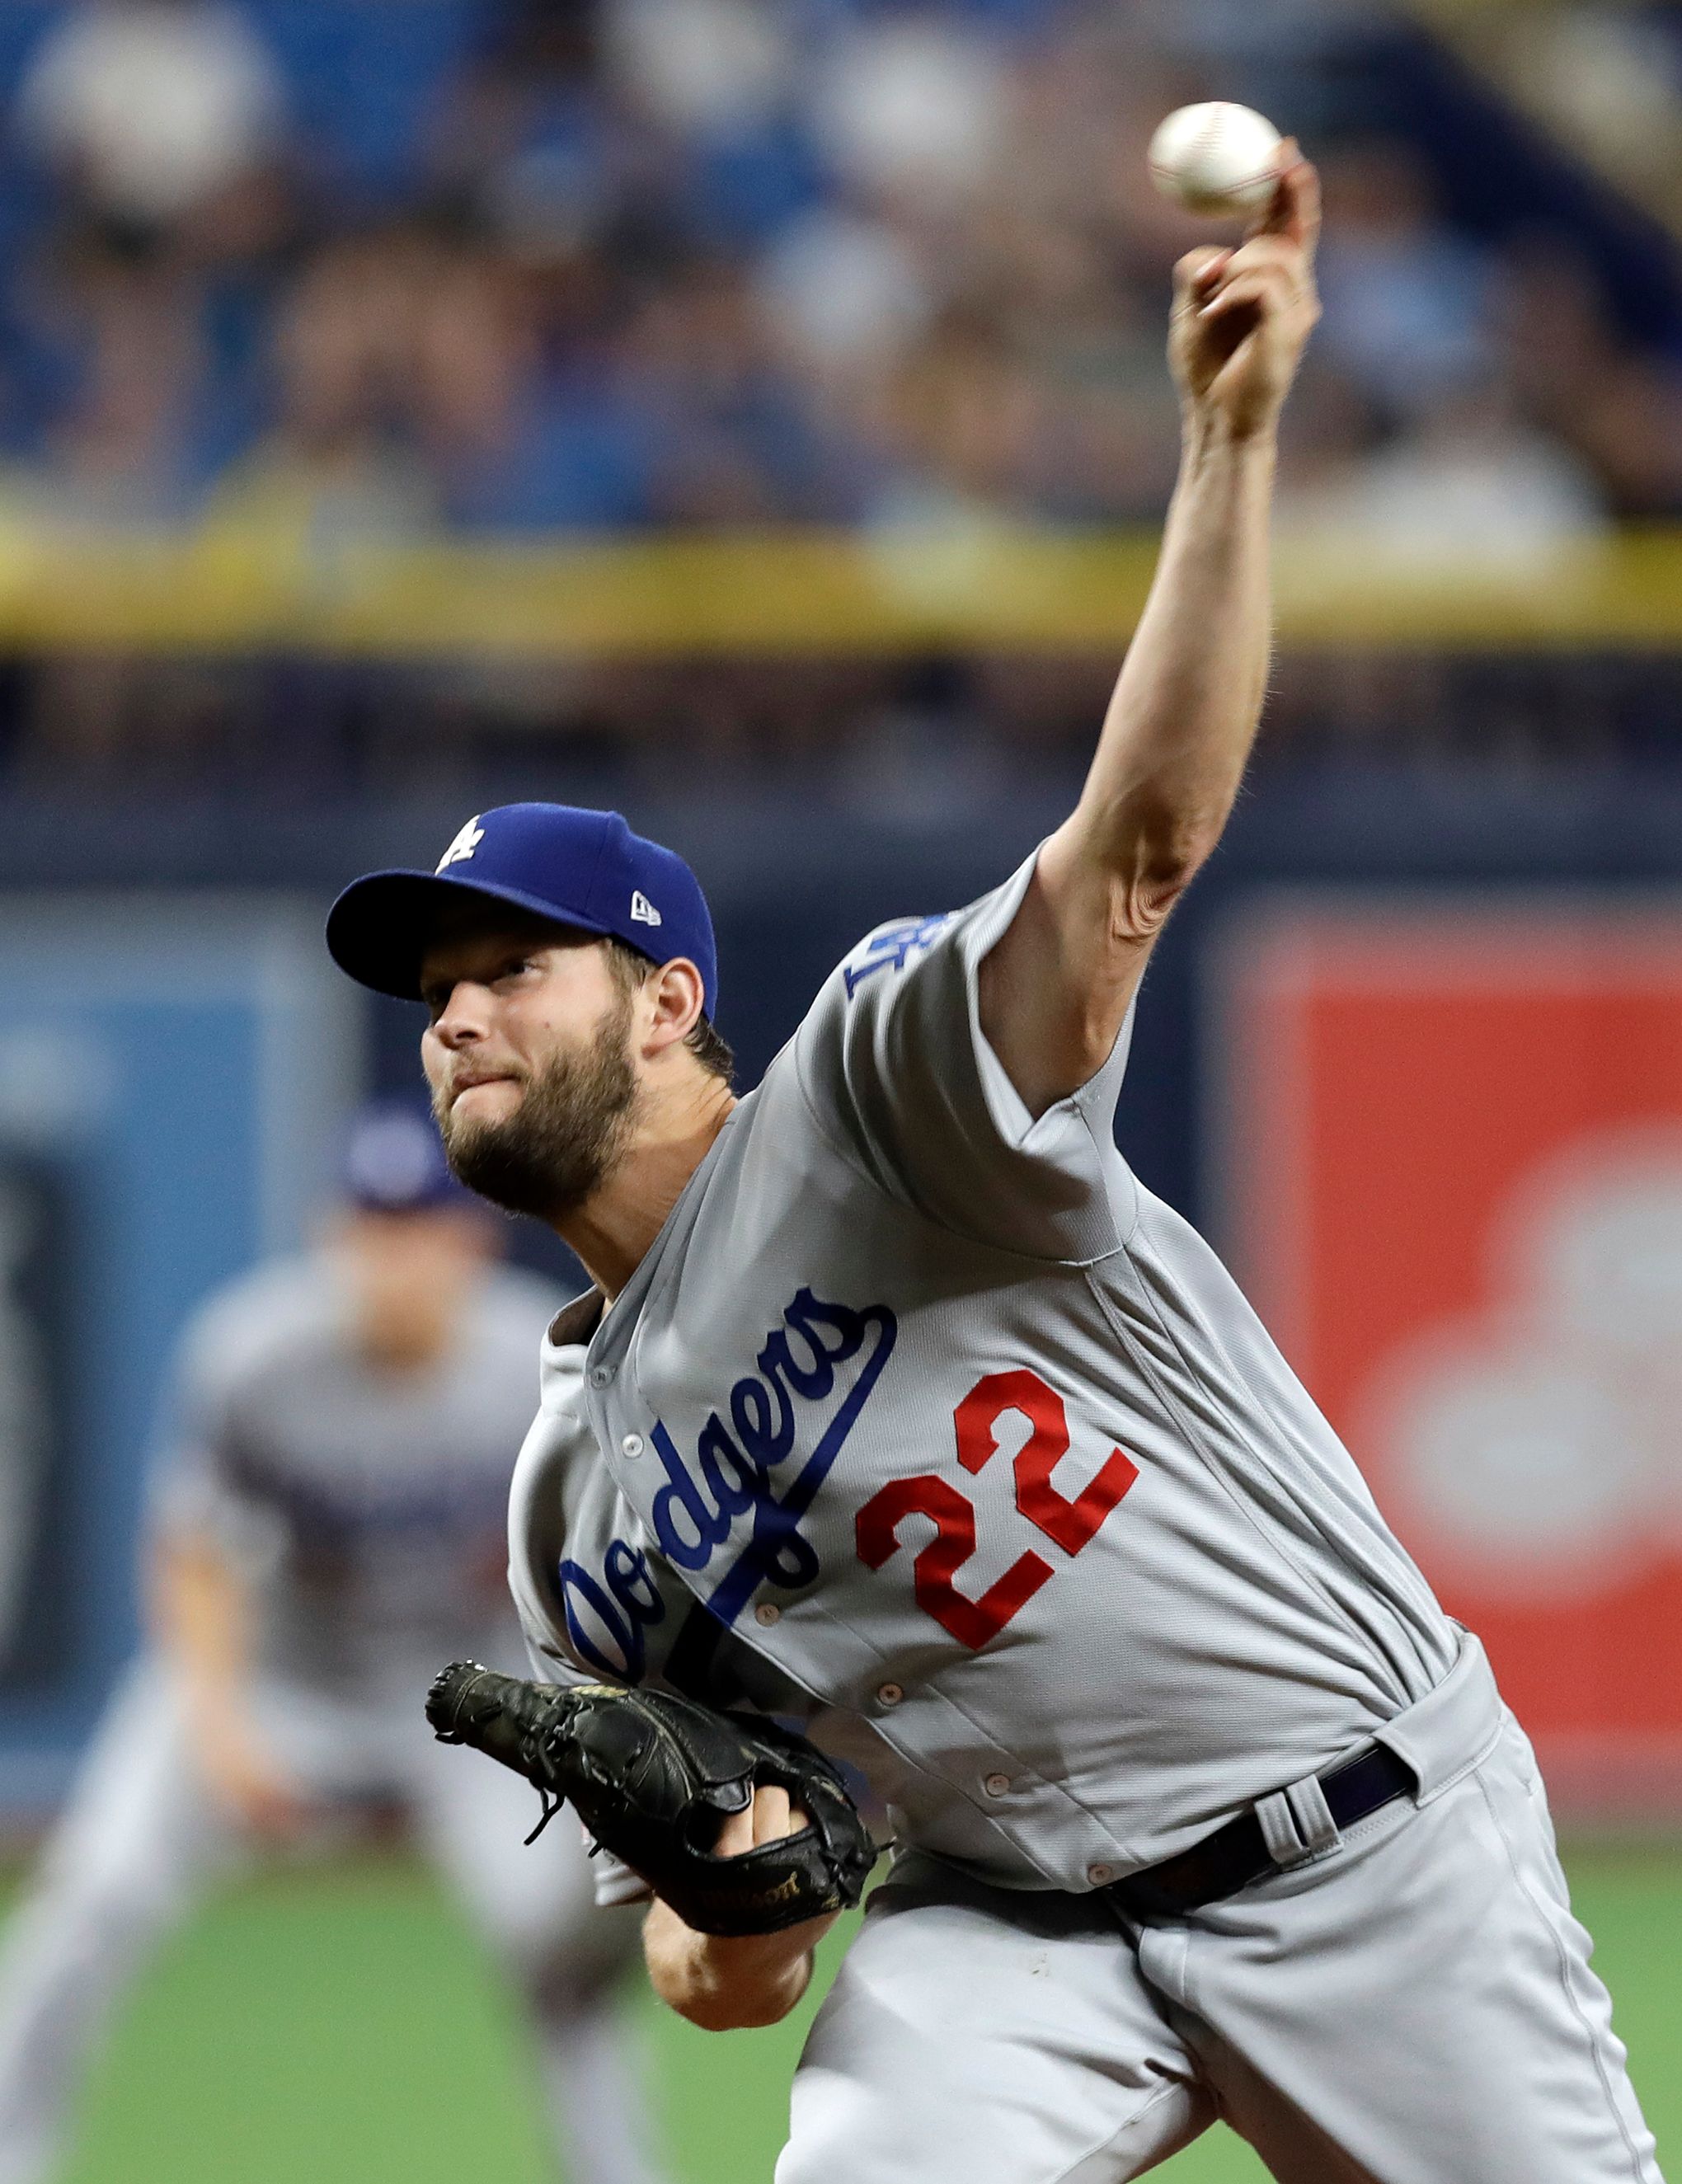 Dodgers beat Rockies 6-1 behind Lynn for 6th straight victory and